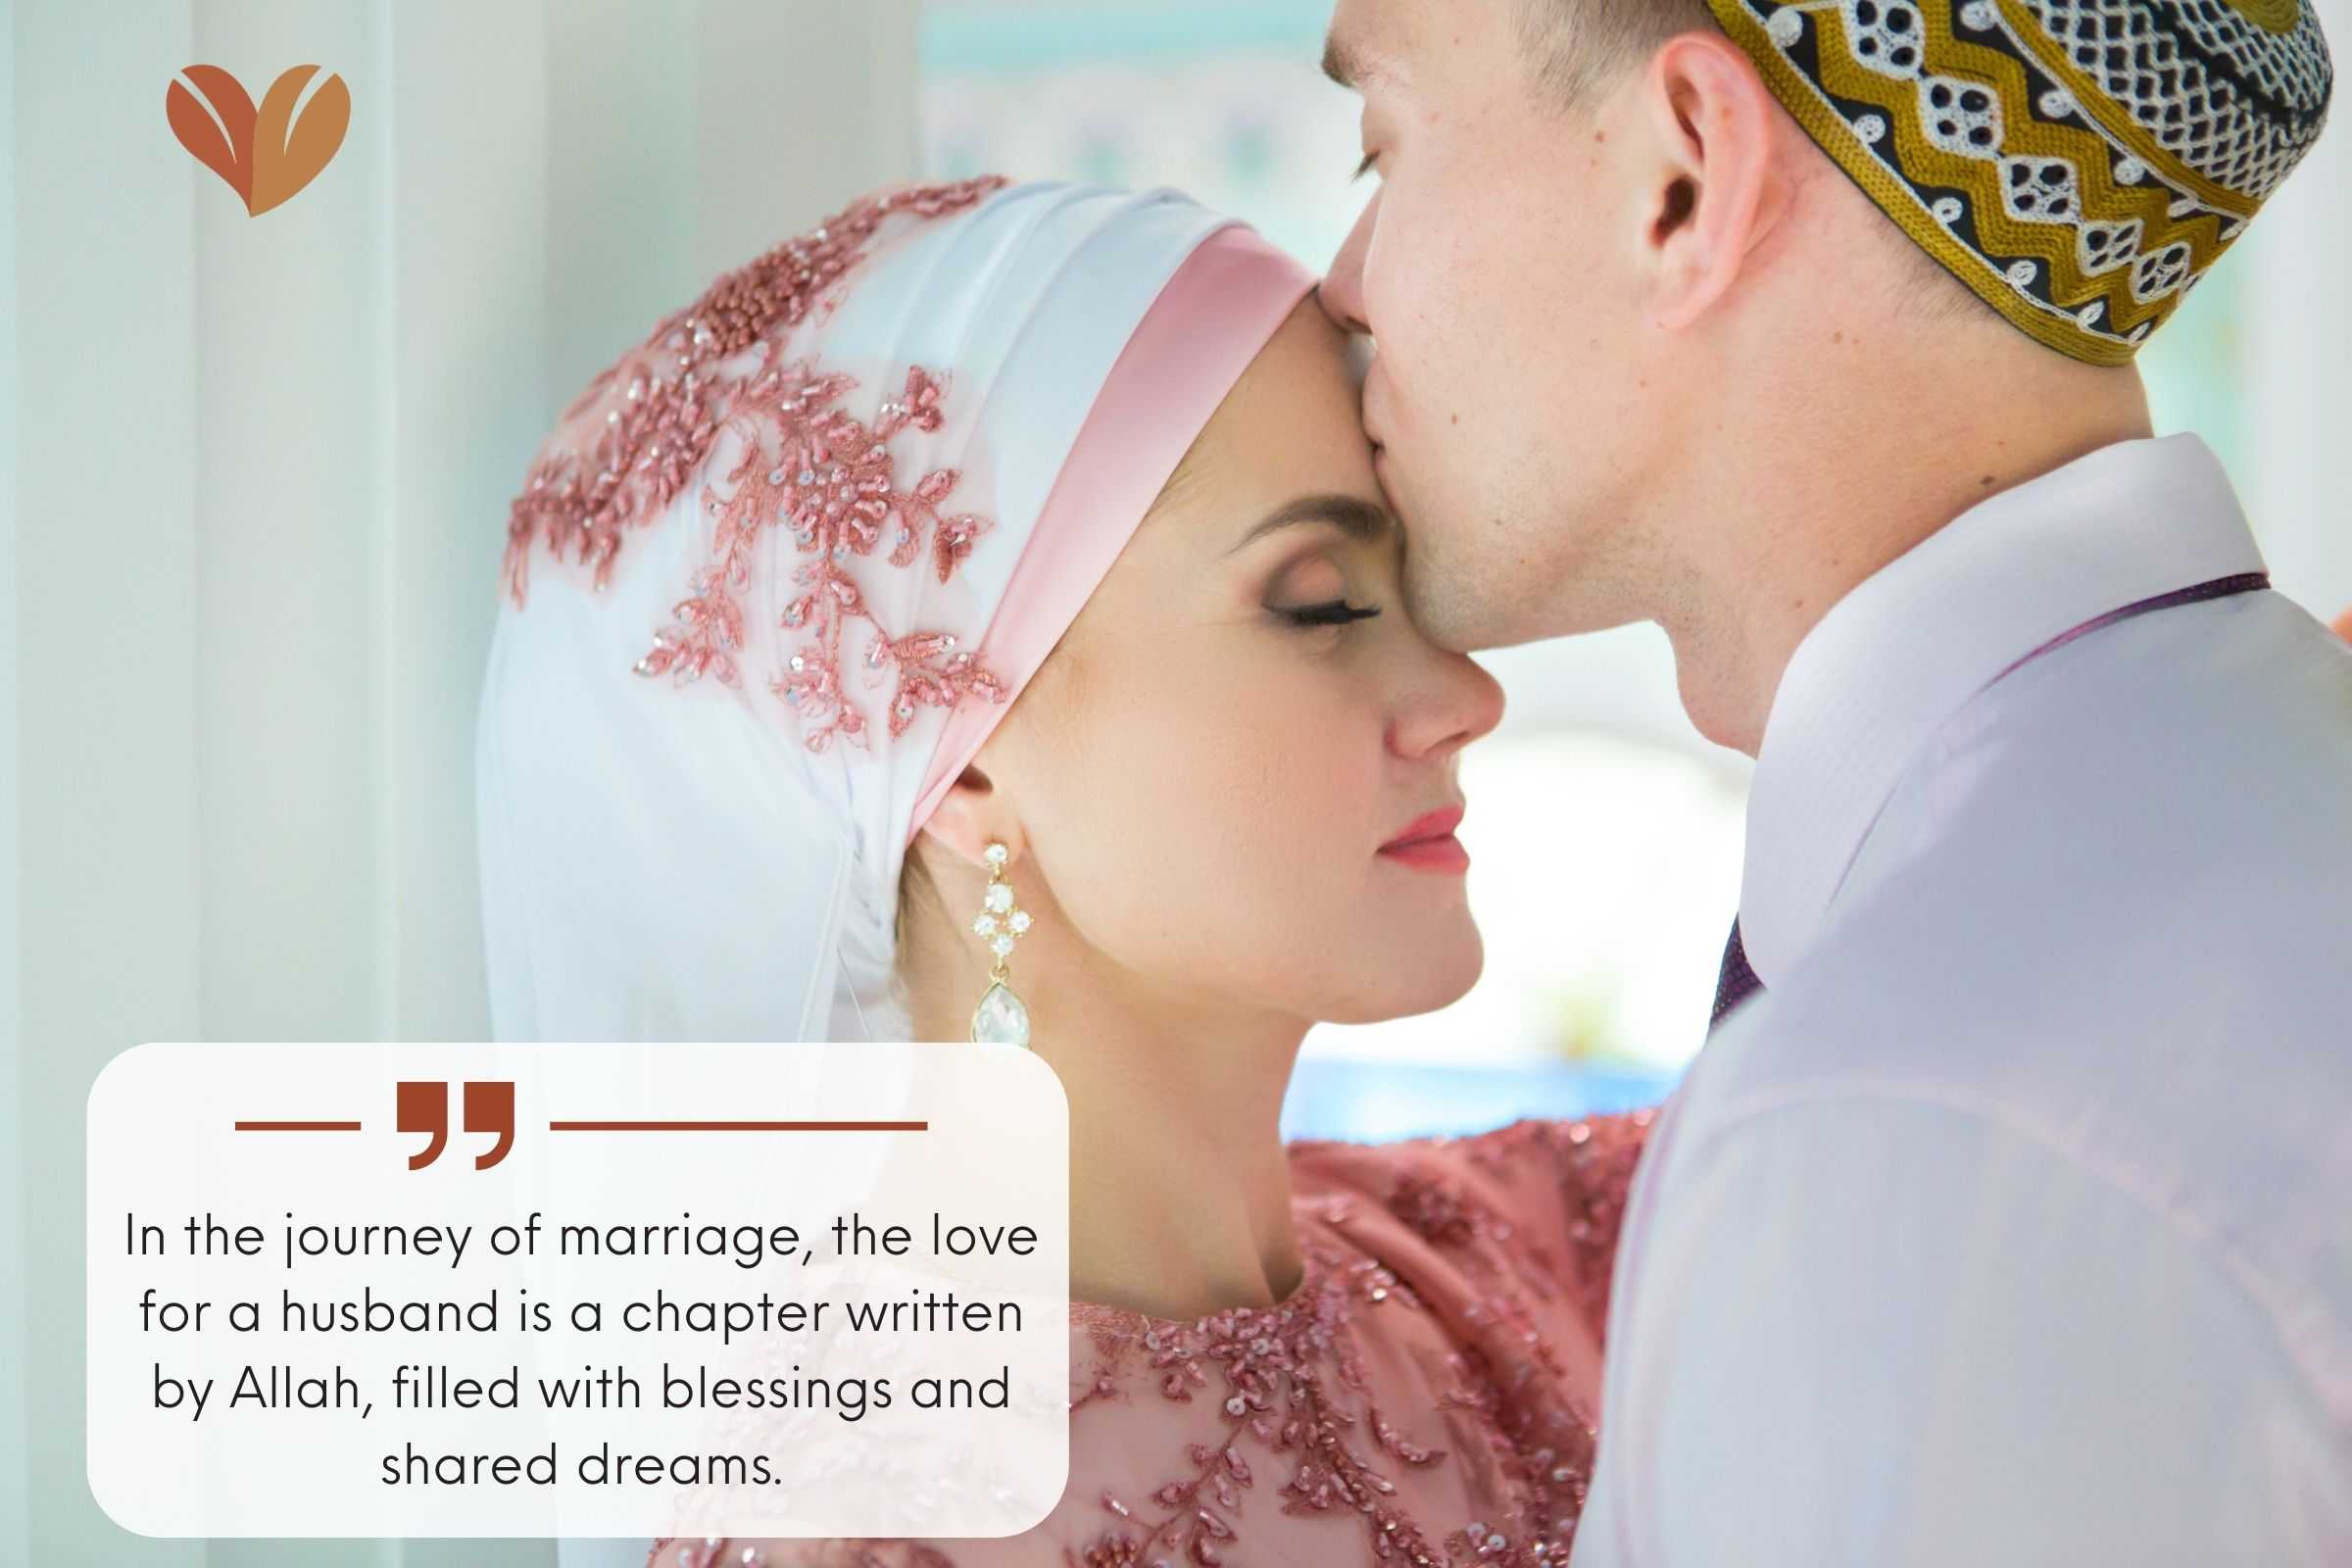 In the journey of marriage, the love for a husband is a chapter written by Allah, filled with blessings and shared dreams